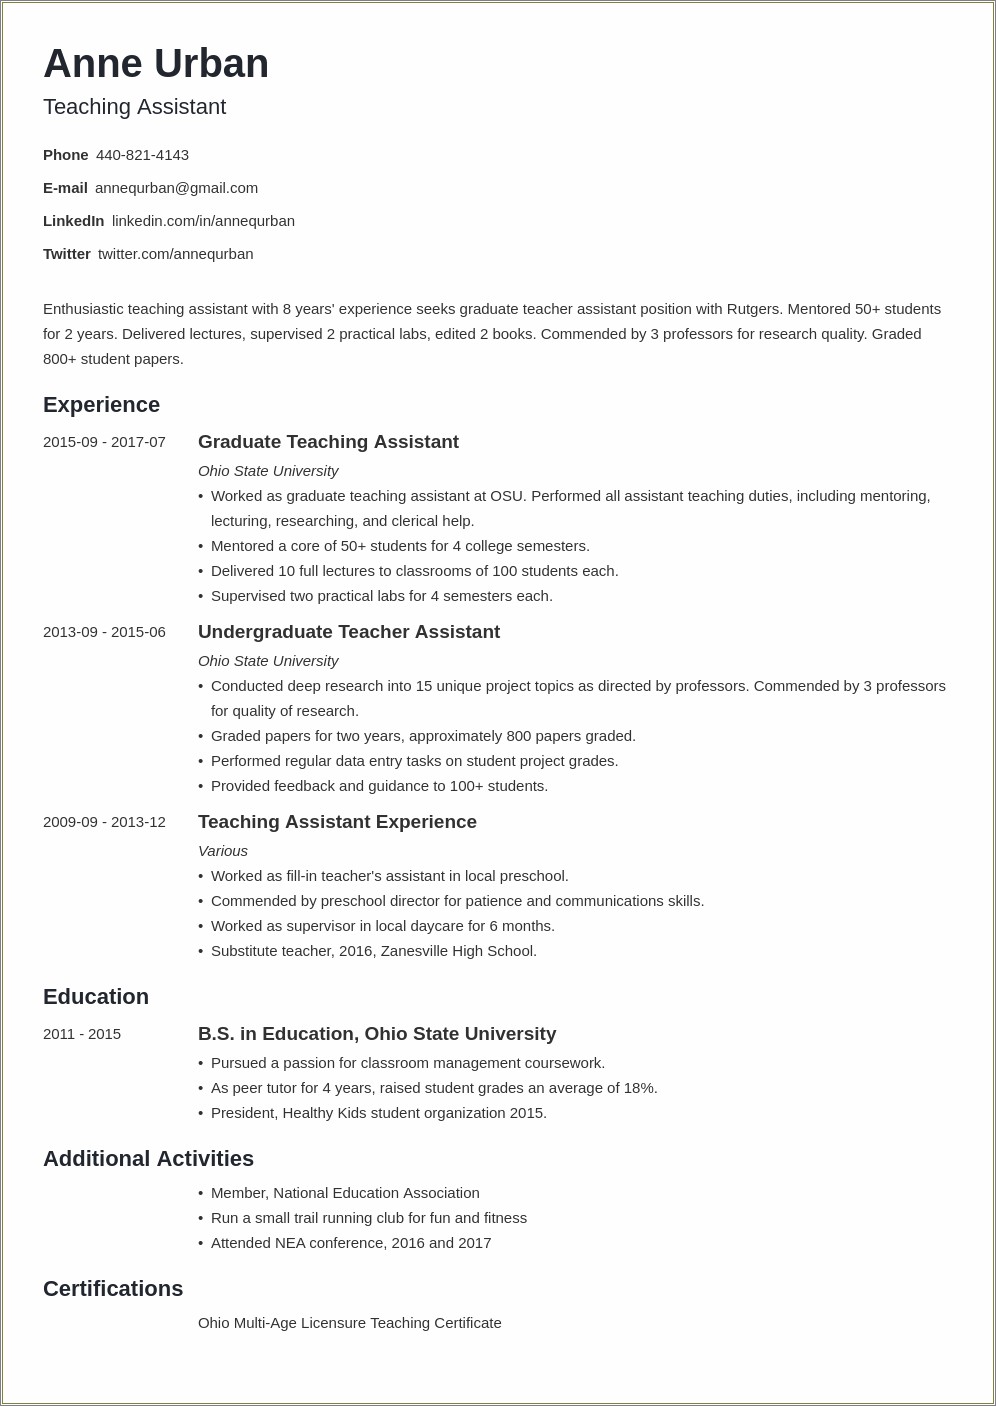 Resume Summary For A Ohio Certified Peer Supporter